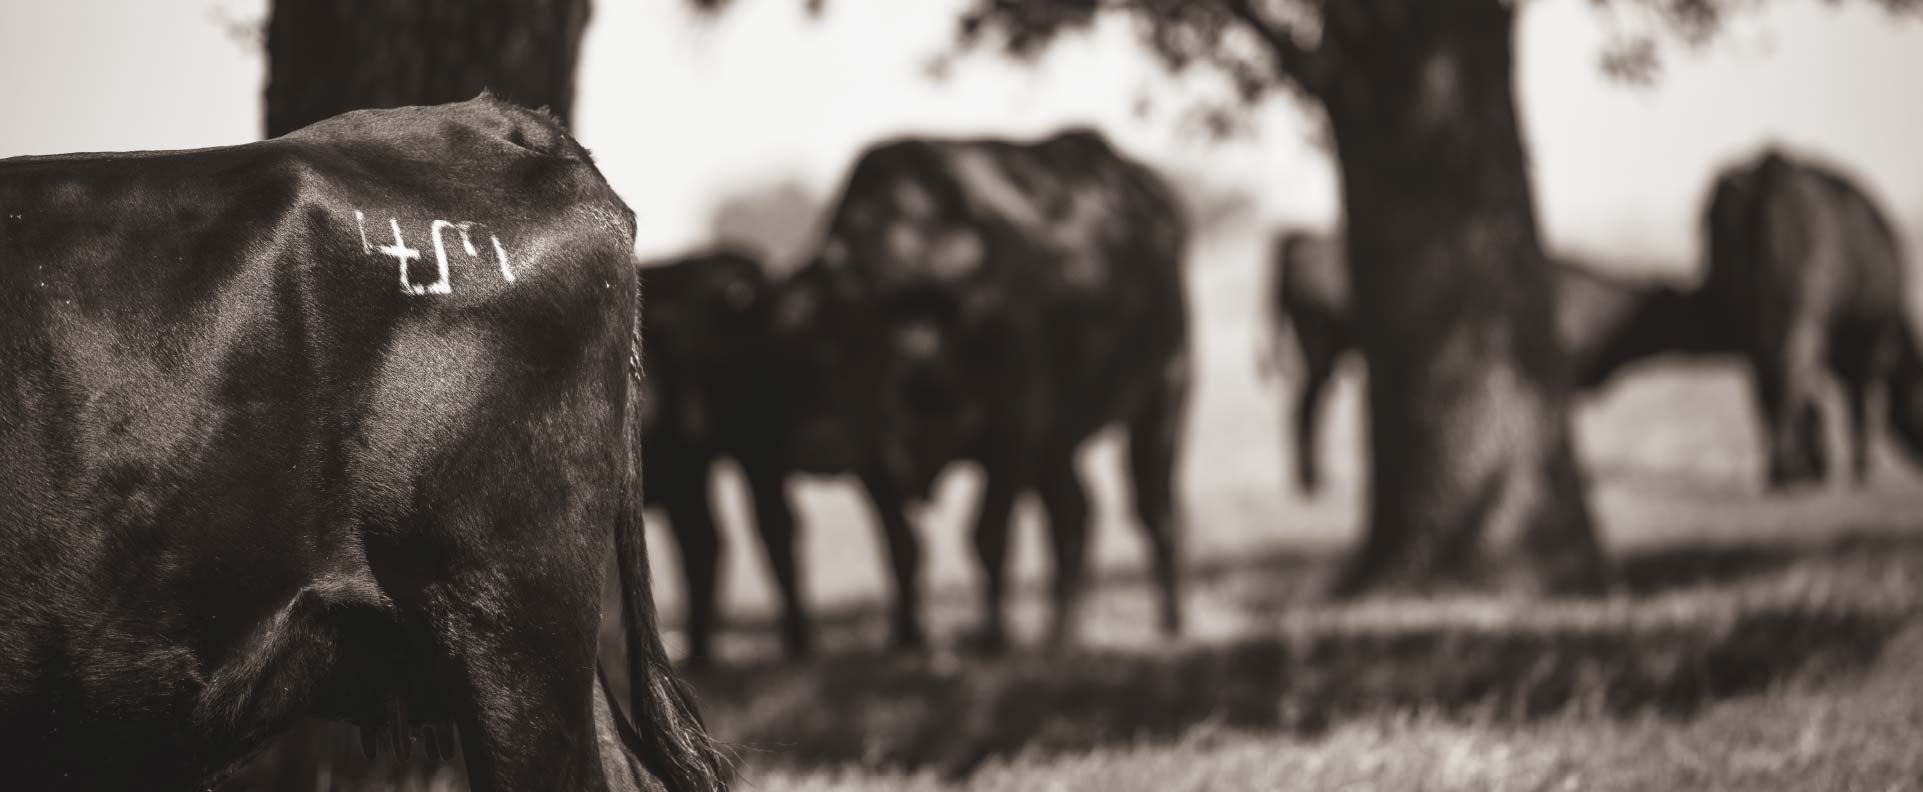 Black and white photo of Cow Silhouette with Brand Tattoo